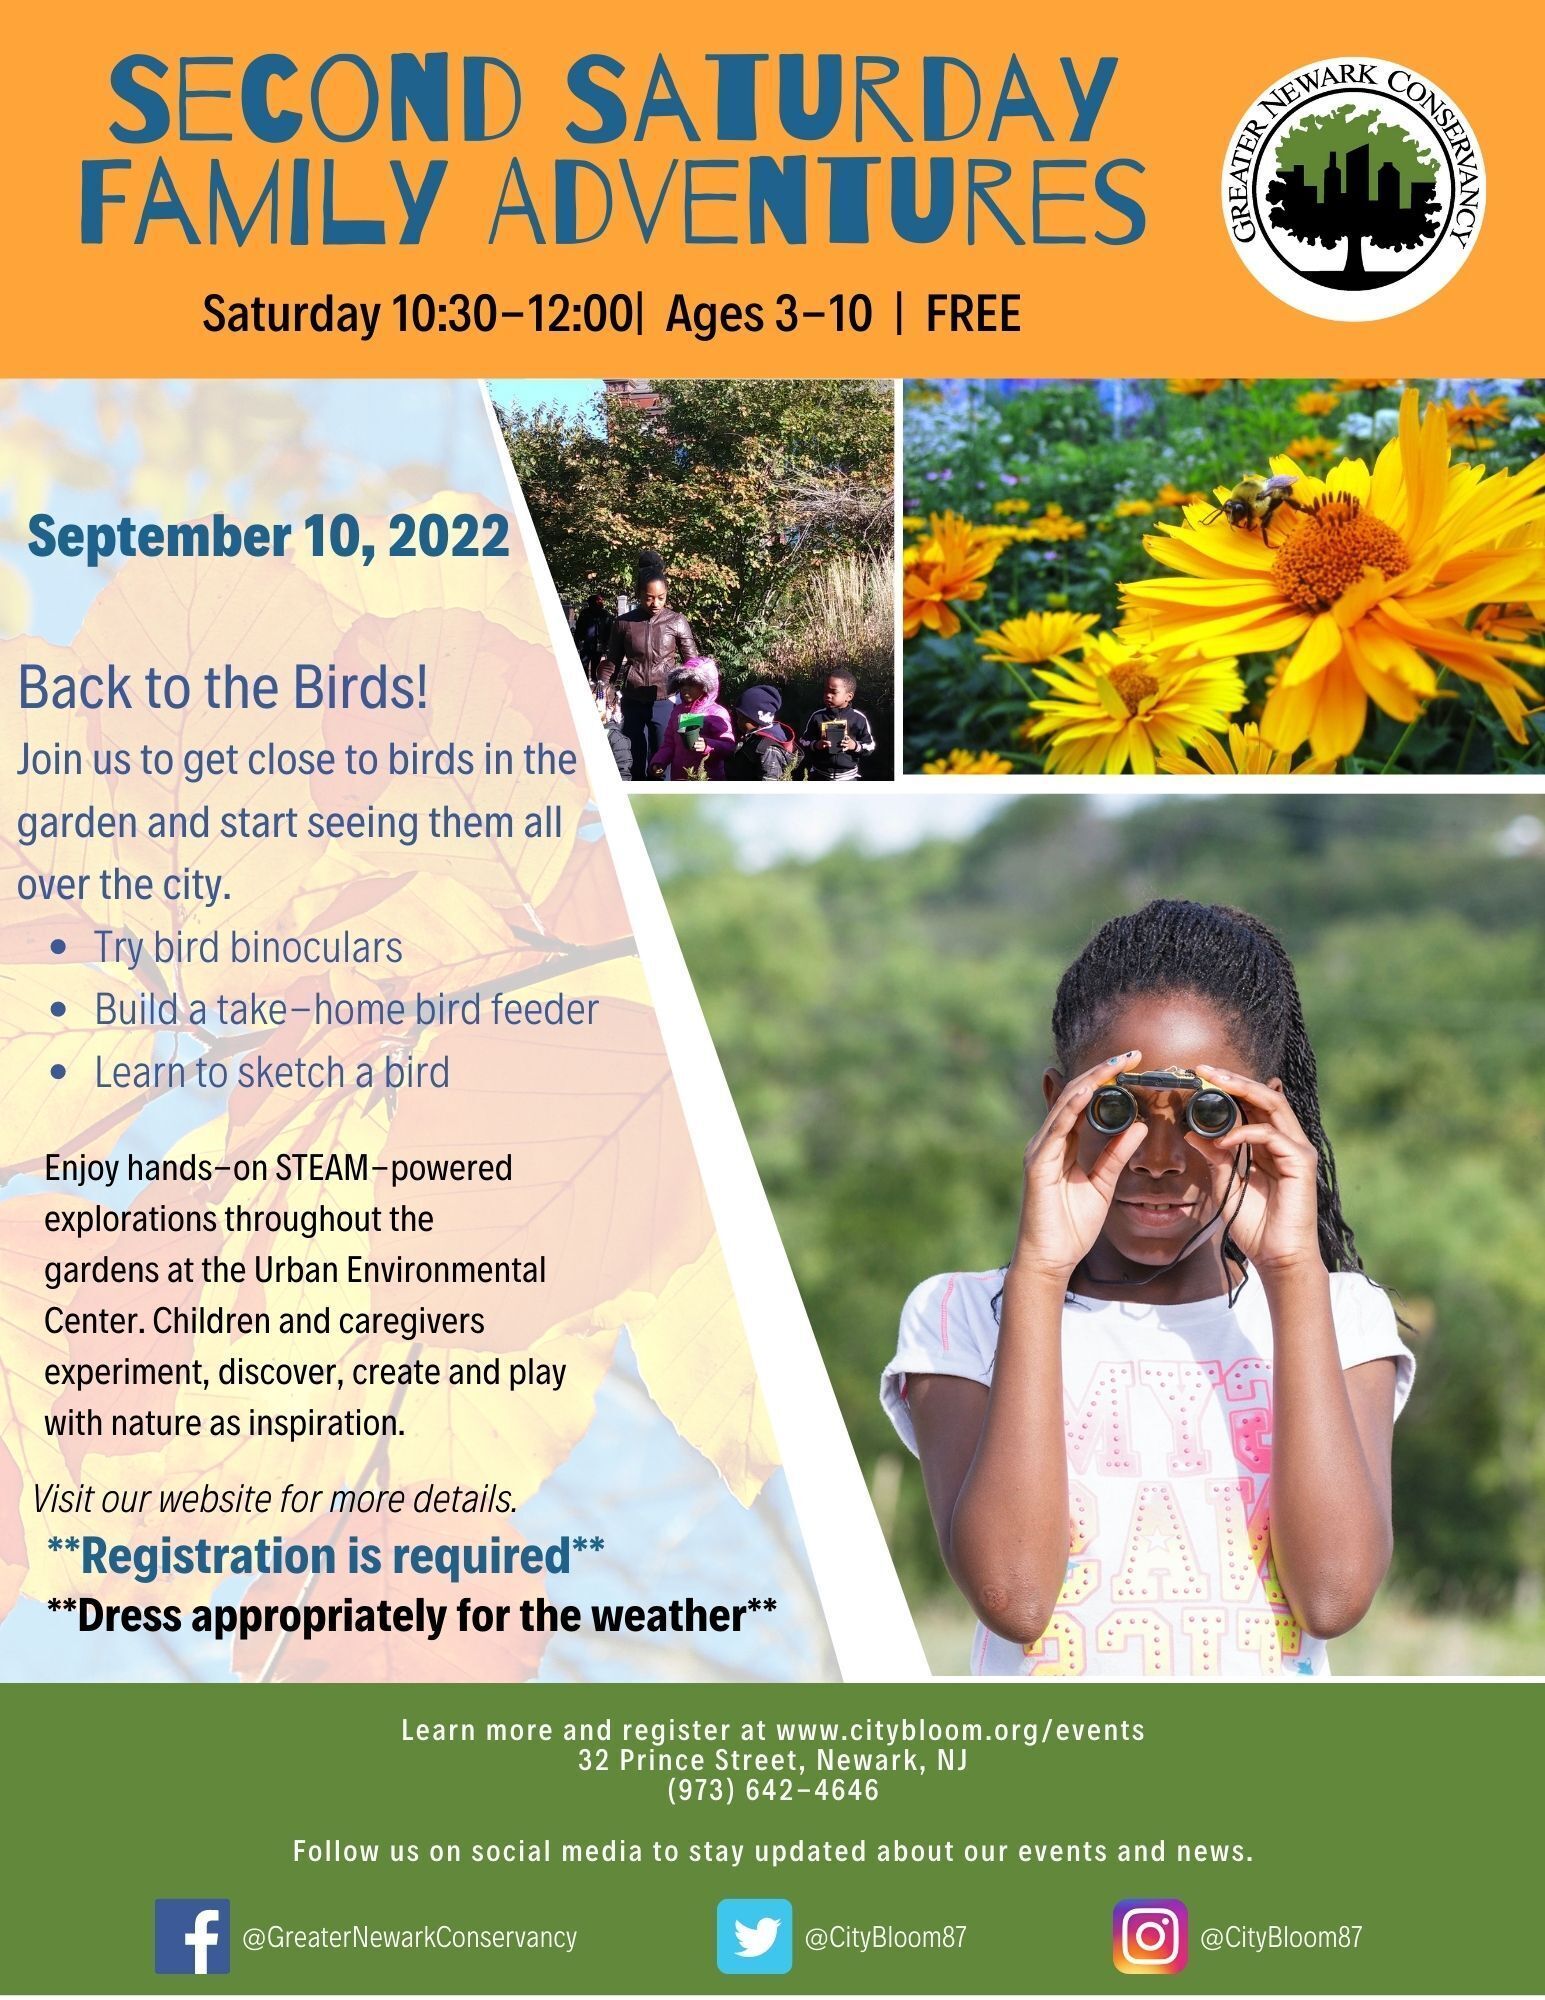 Join us for "Back to the Birds"!  Make and take a bird feeder, peep birds through binoculars, and learn to draw your favorite birds!